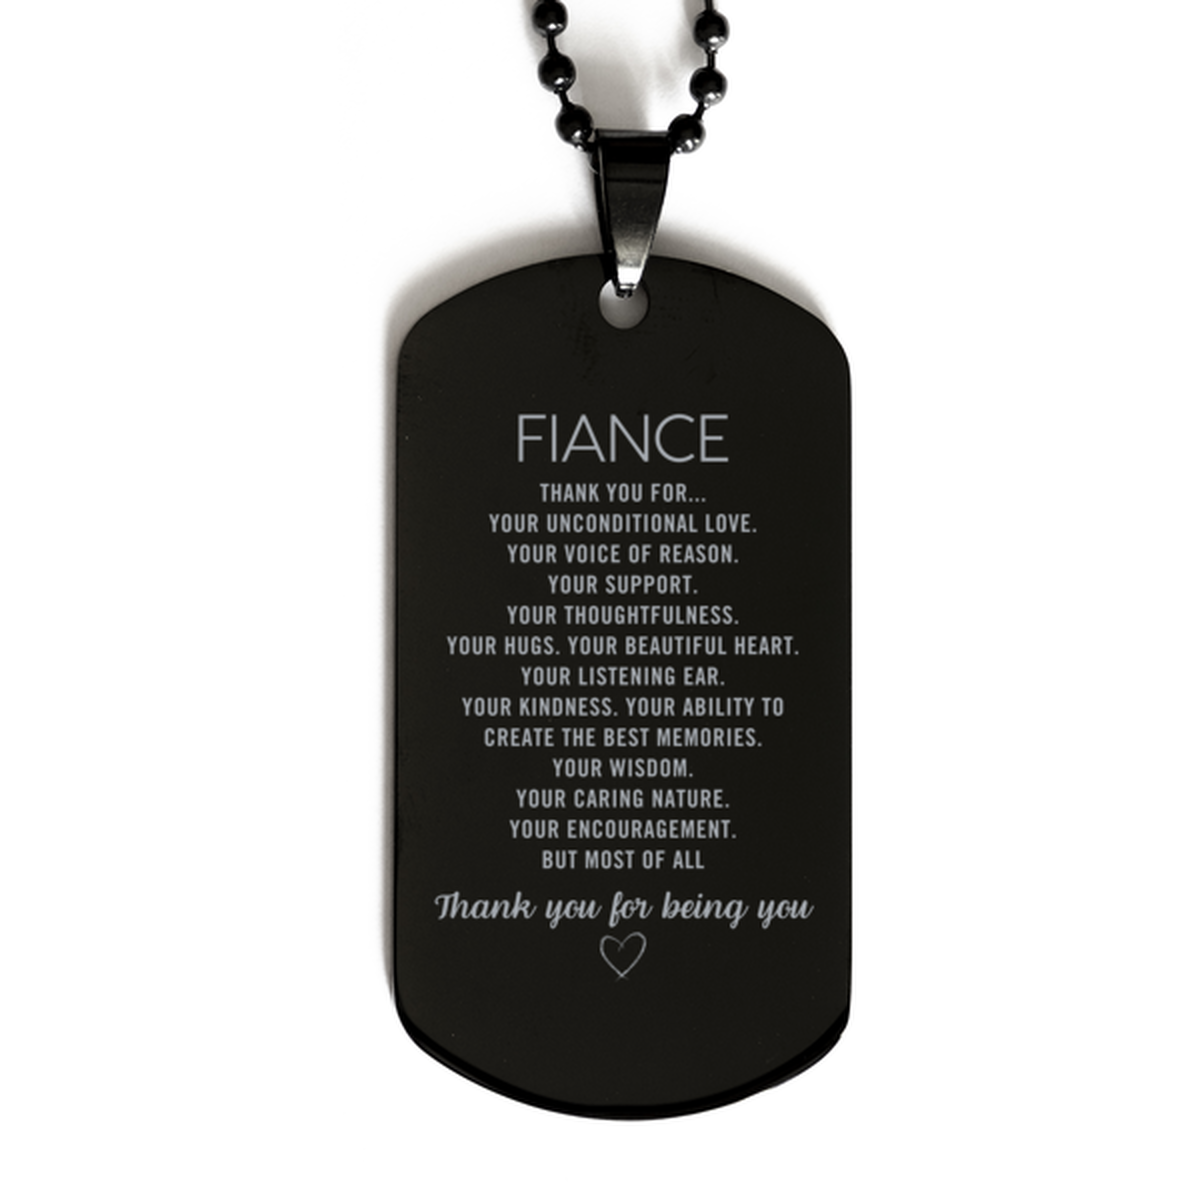 Fiance Black Dog Tag Custom, Engraved Gifts For Fiance Christmas Graduation Birthday Gifts for Men Women Fiance Thank you for Your unconditional love